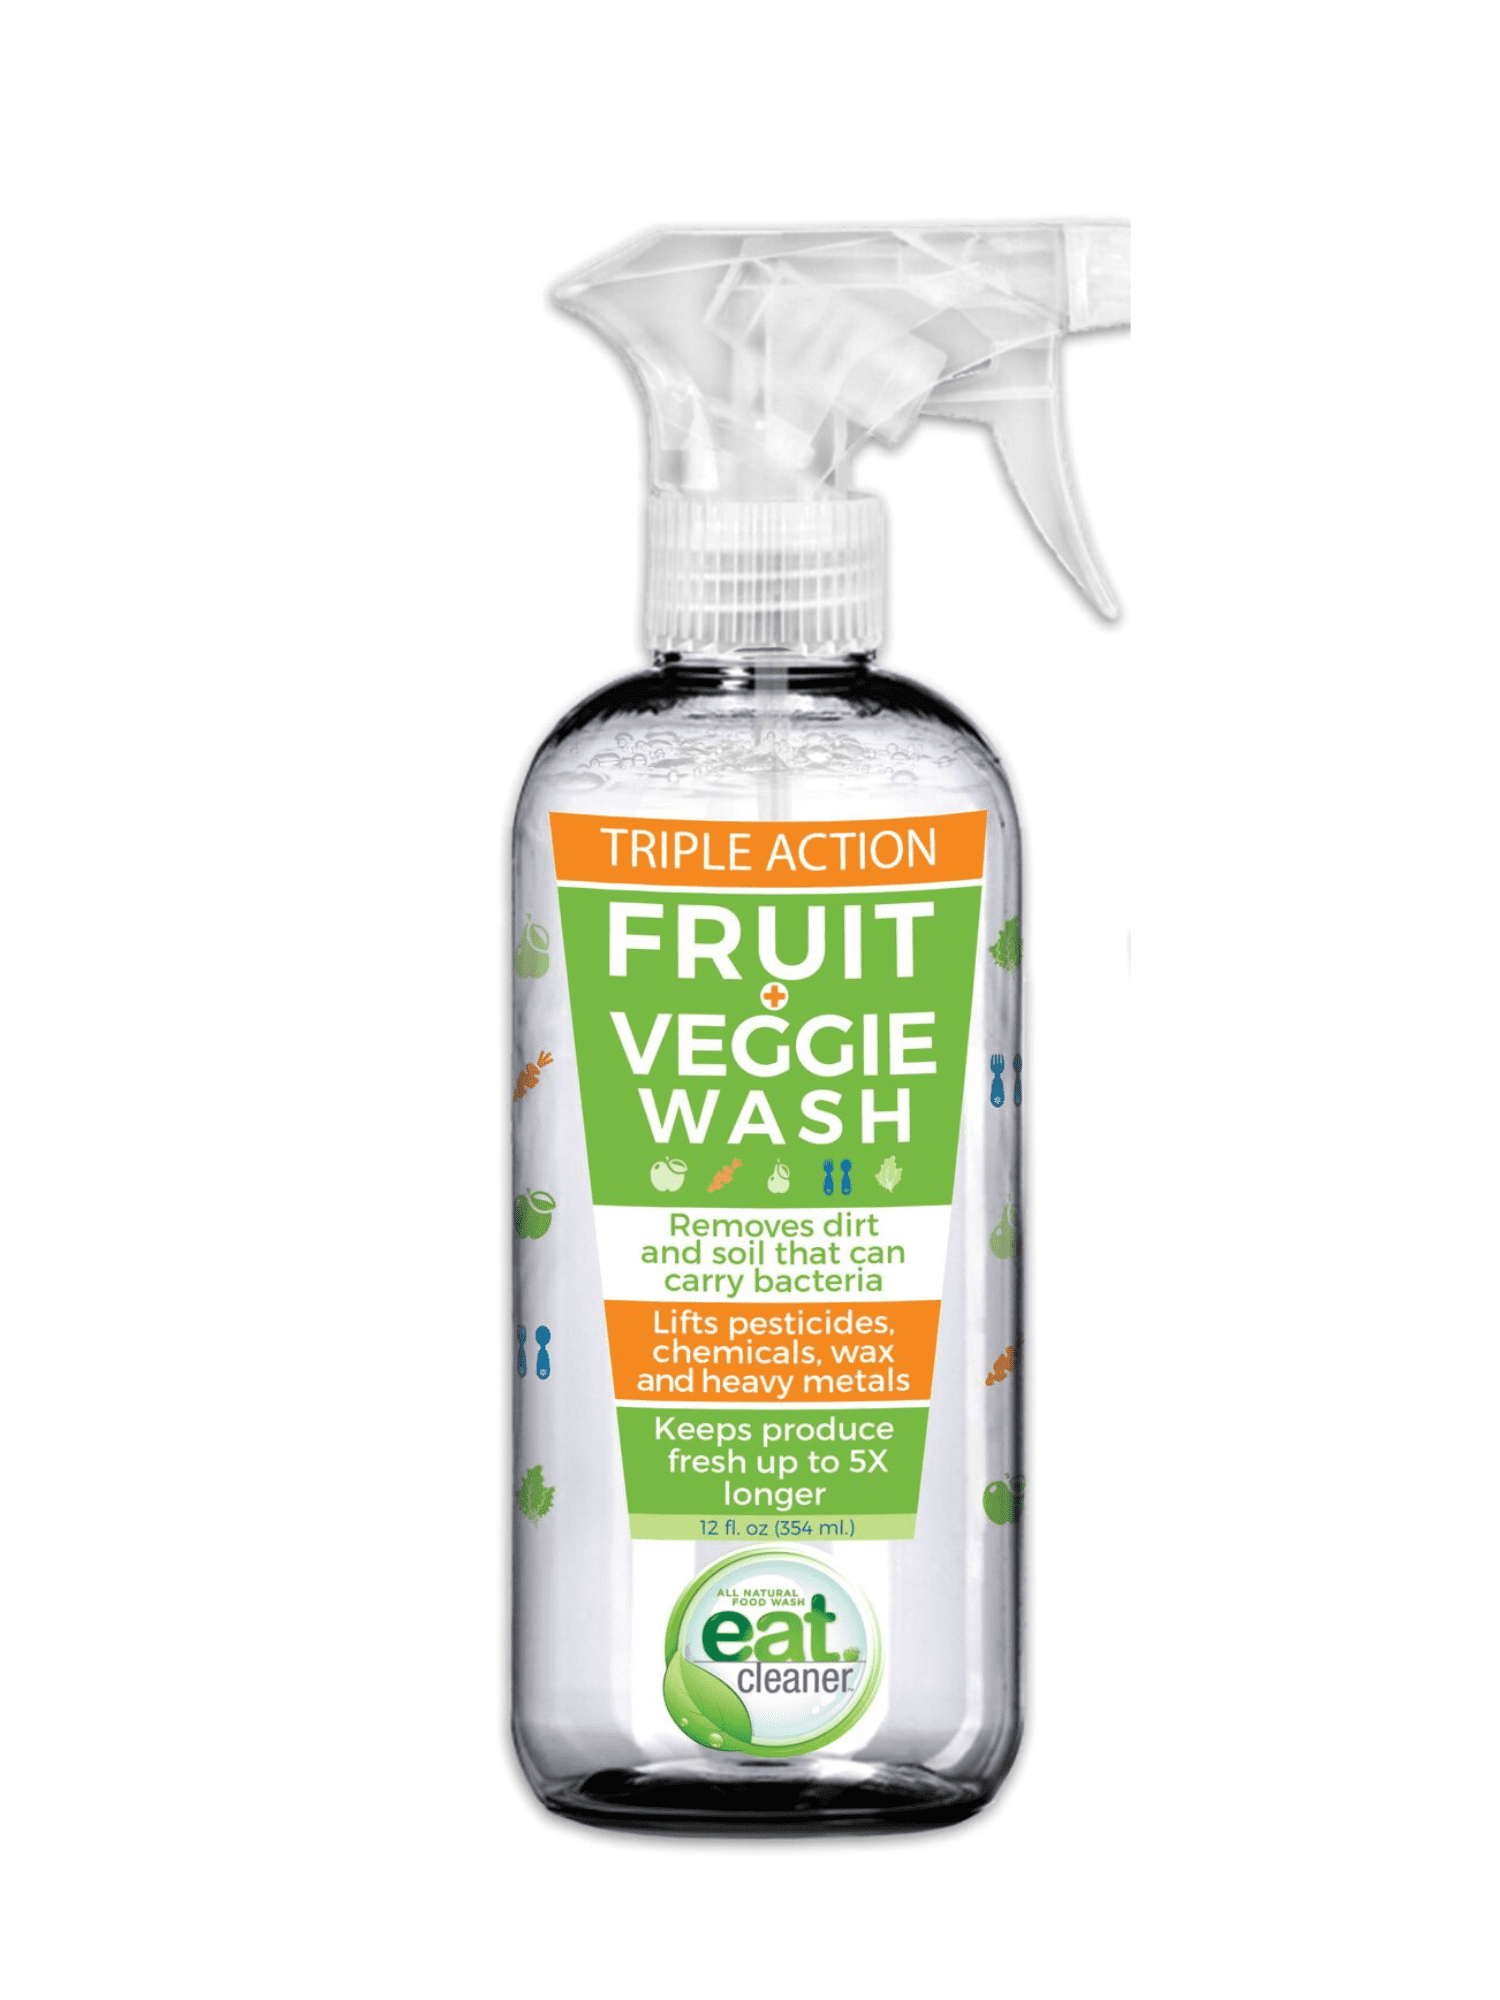 Fruit And Vegetable Cleaner 16 Ounces X 2 - IGreenPro, The First Affordable  Eco Friendly Green Cleaning and Personal Care Products